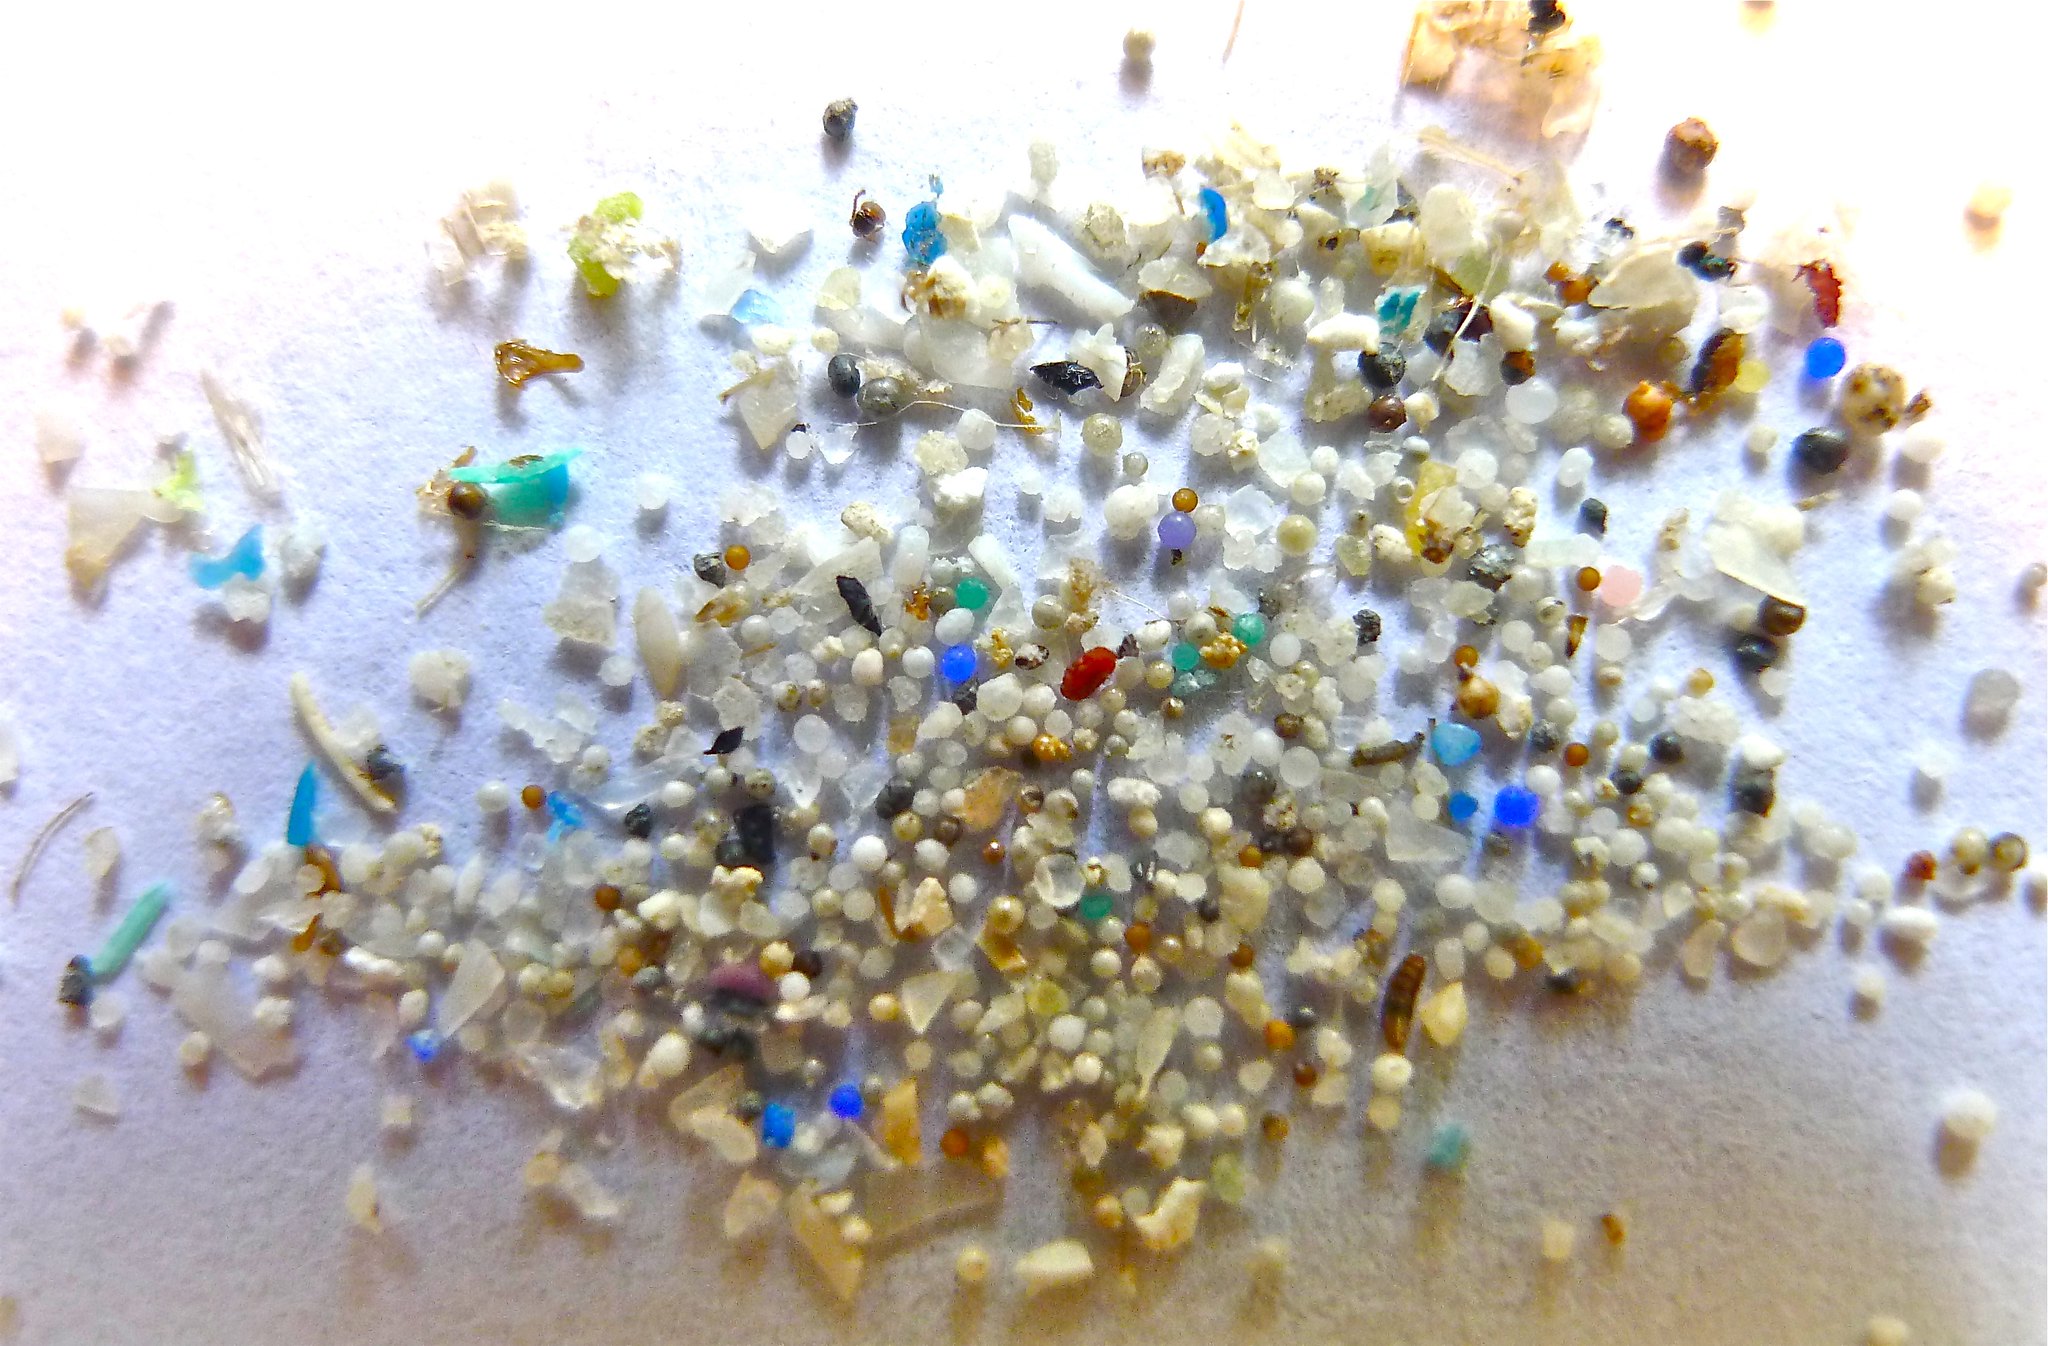 Microplastic separation from soil 